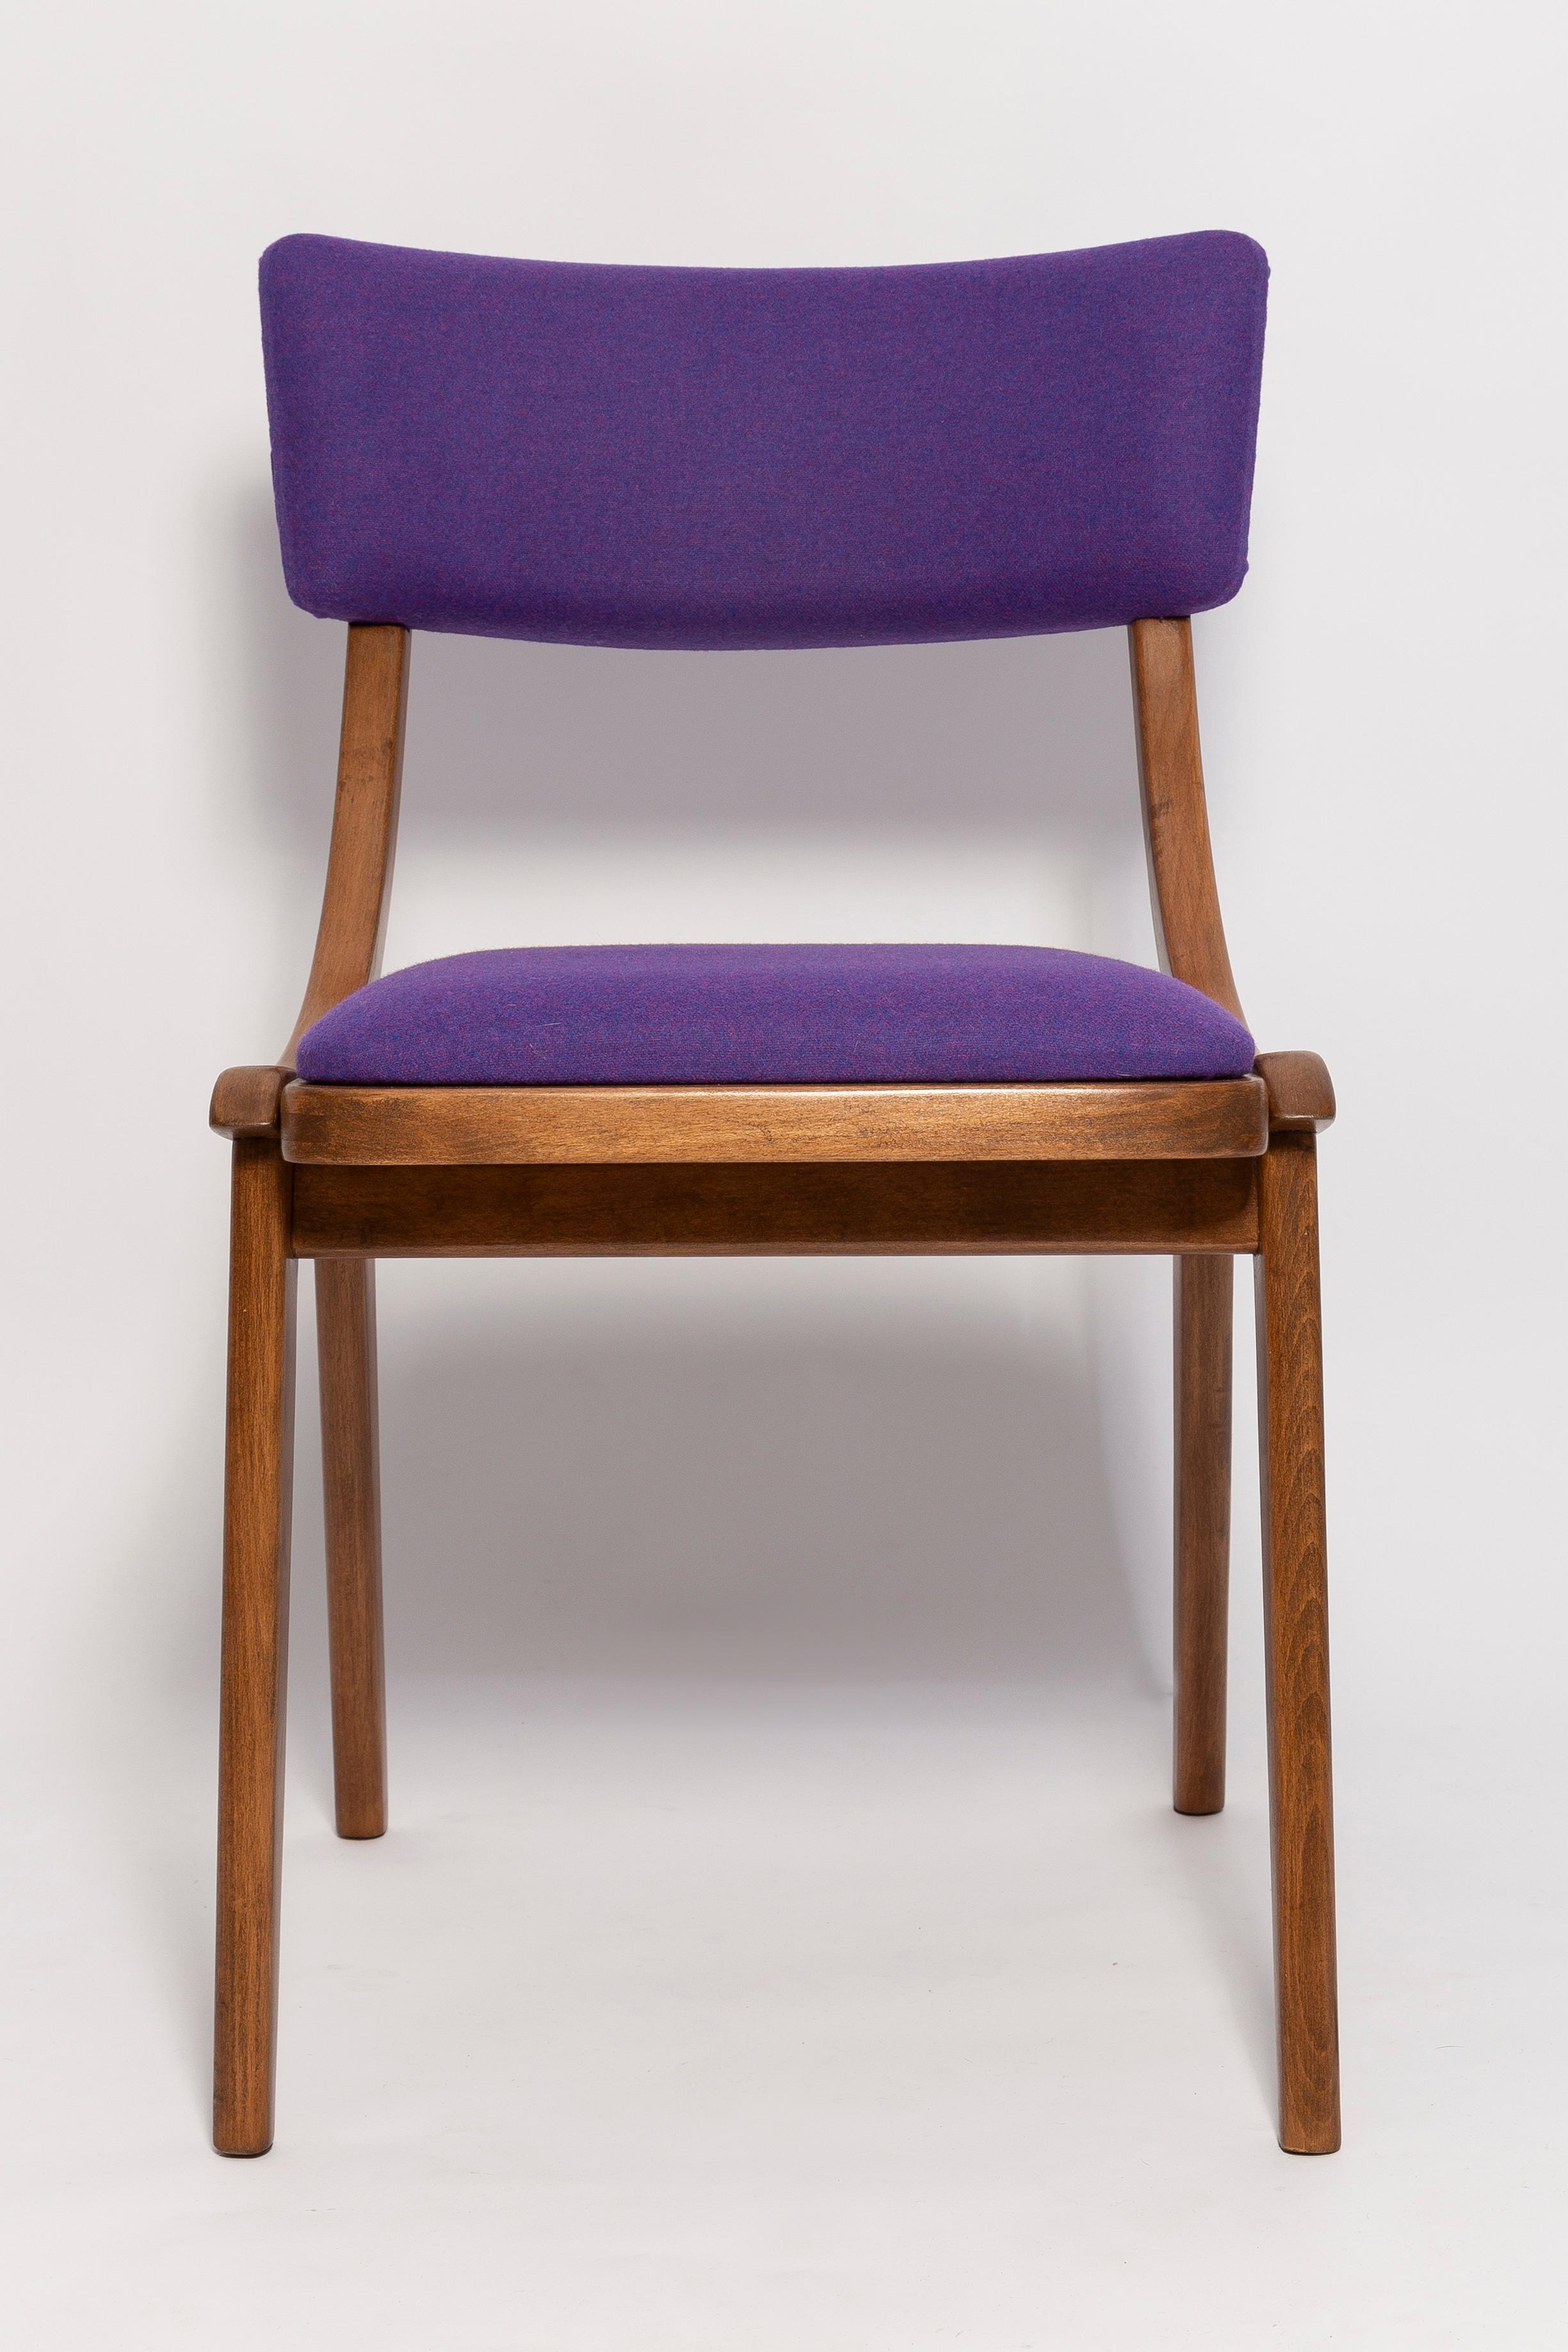 Six Mid Century Modern Bumerang Chairs, Purple Violet Wool, Poland, 1960s For Sale 3